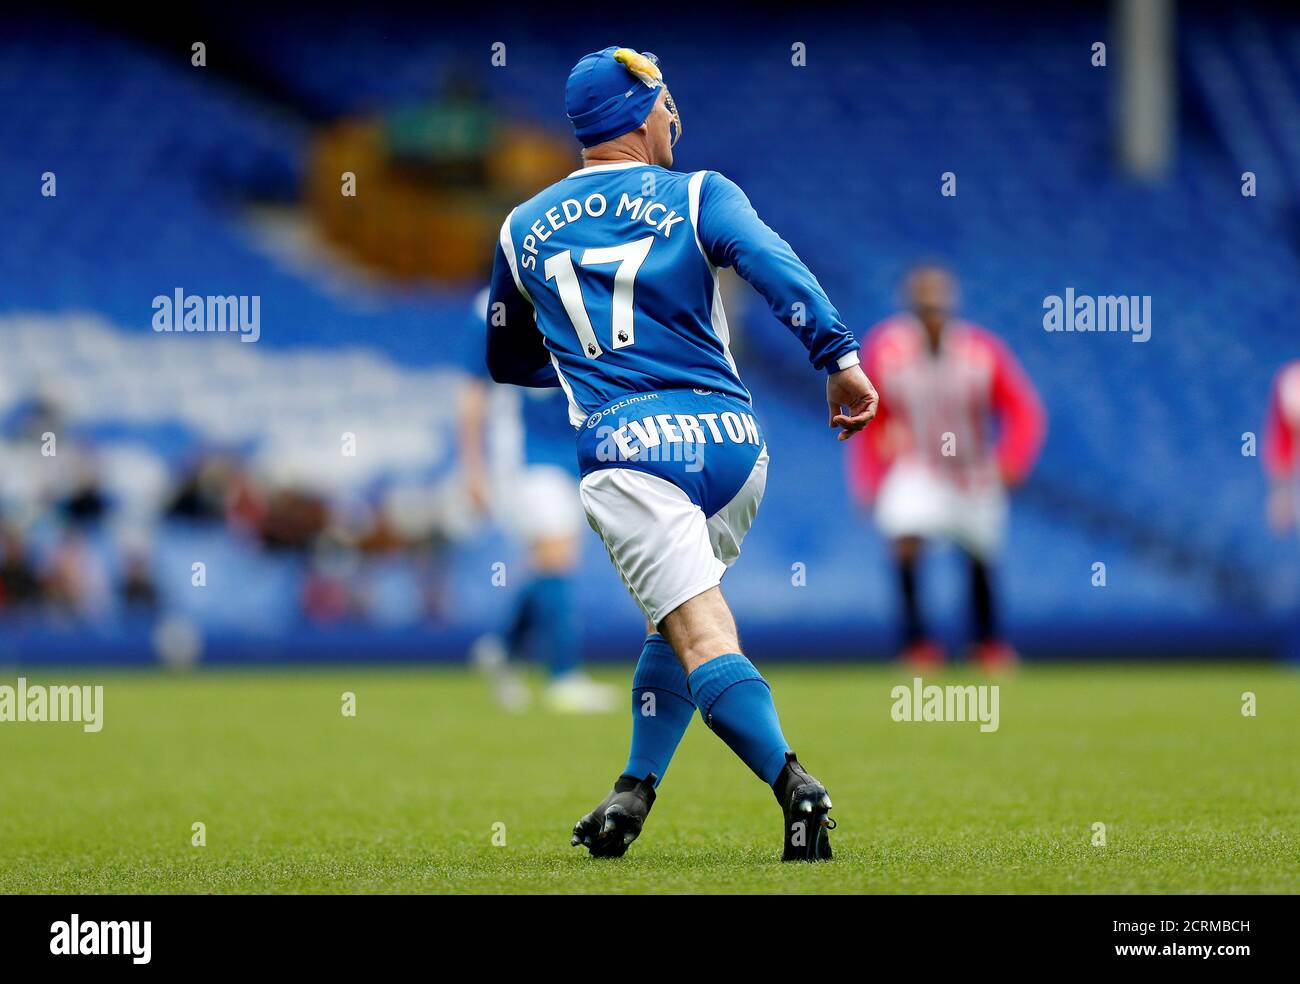 Speedo Mick High Resolution Stock Photography and Images - Alamy